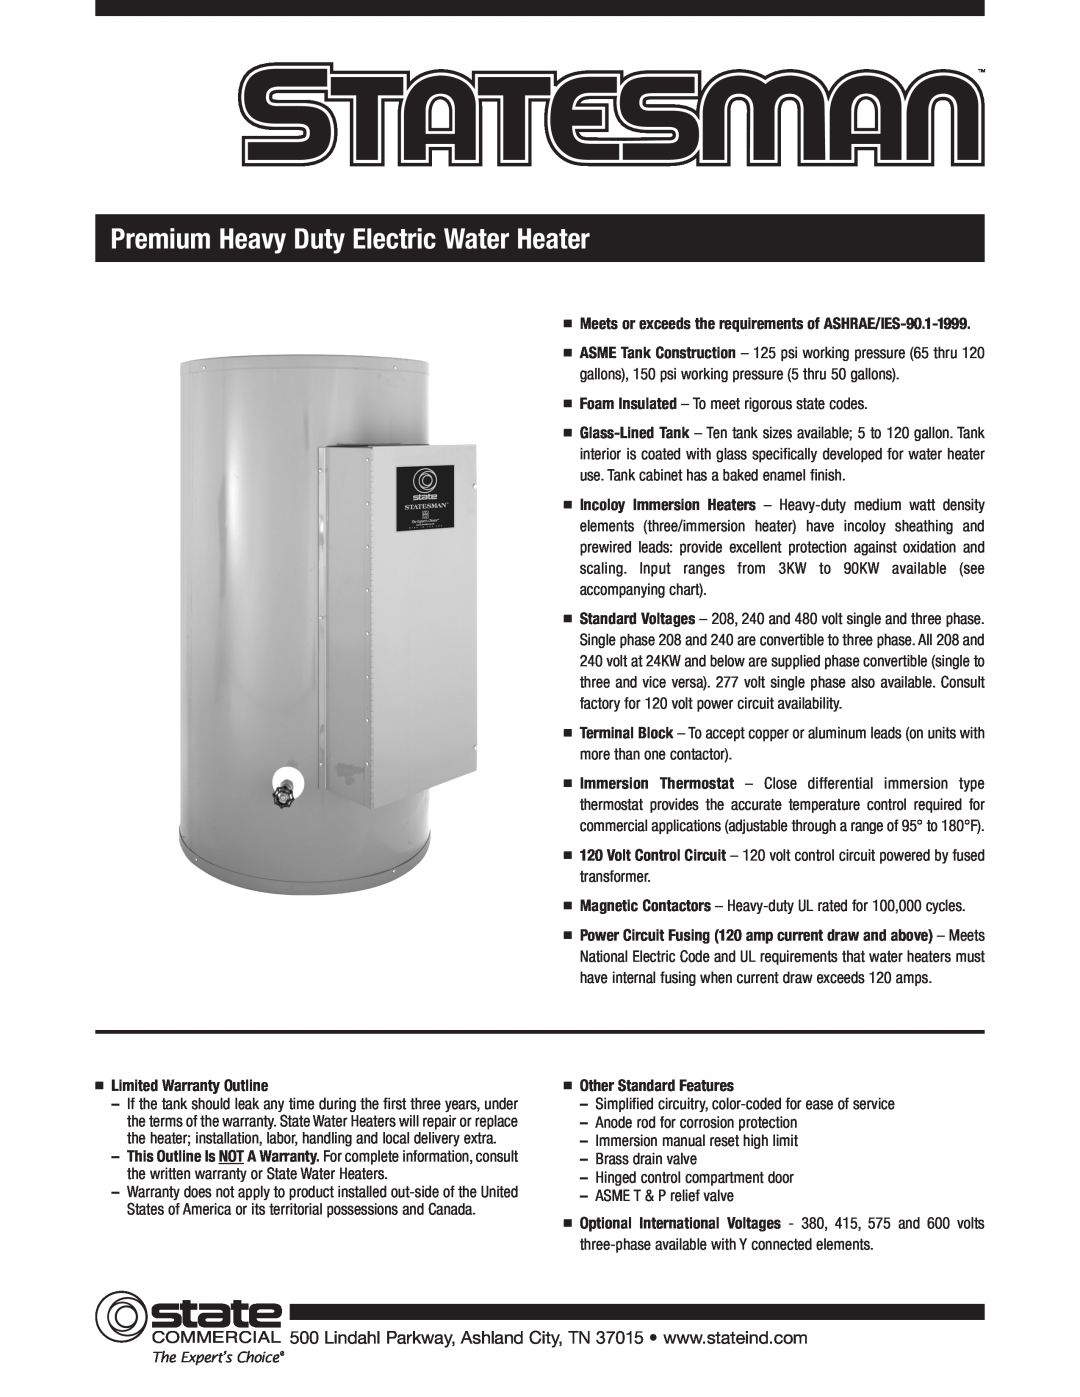 State Industries warranty Premium Heavy Duty Electric Water Heater, Limited Warranty Outline, Other Standard Features 